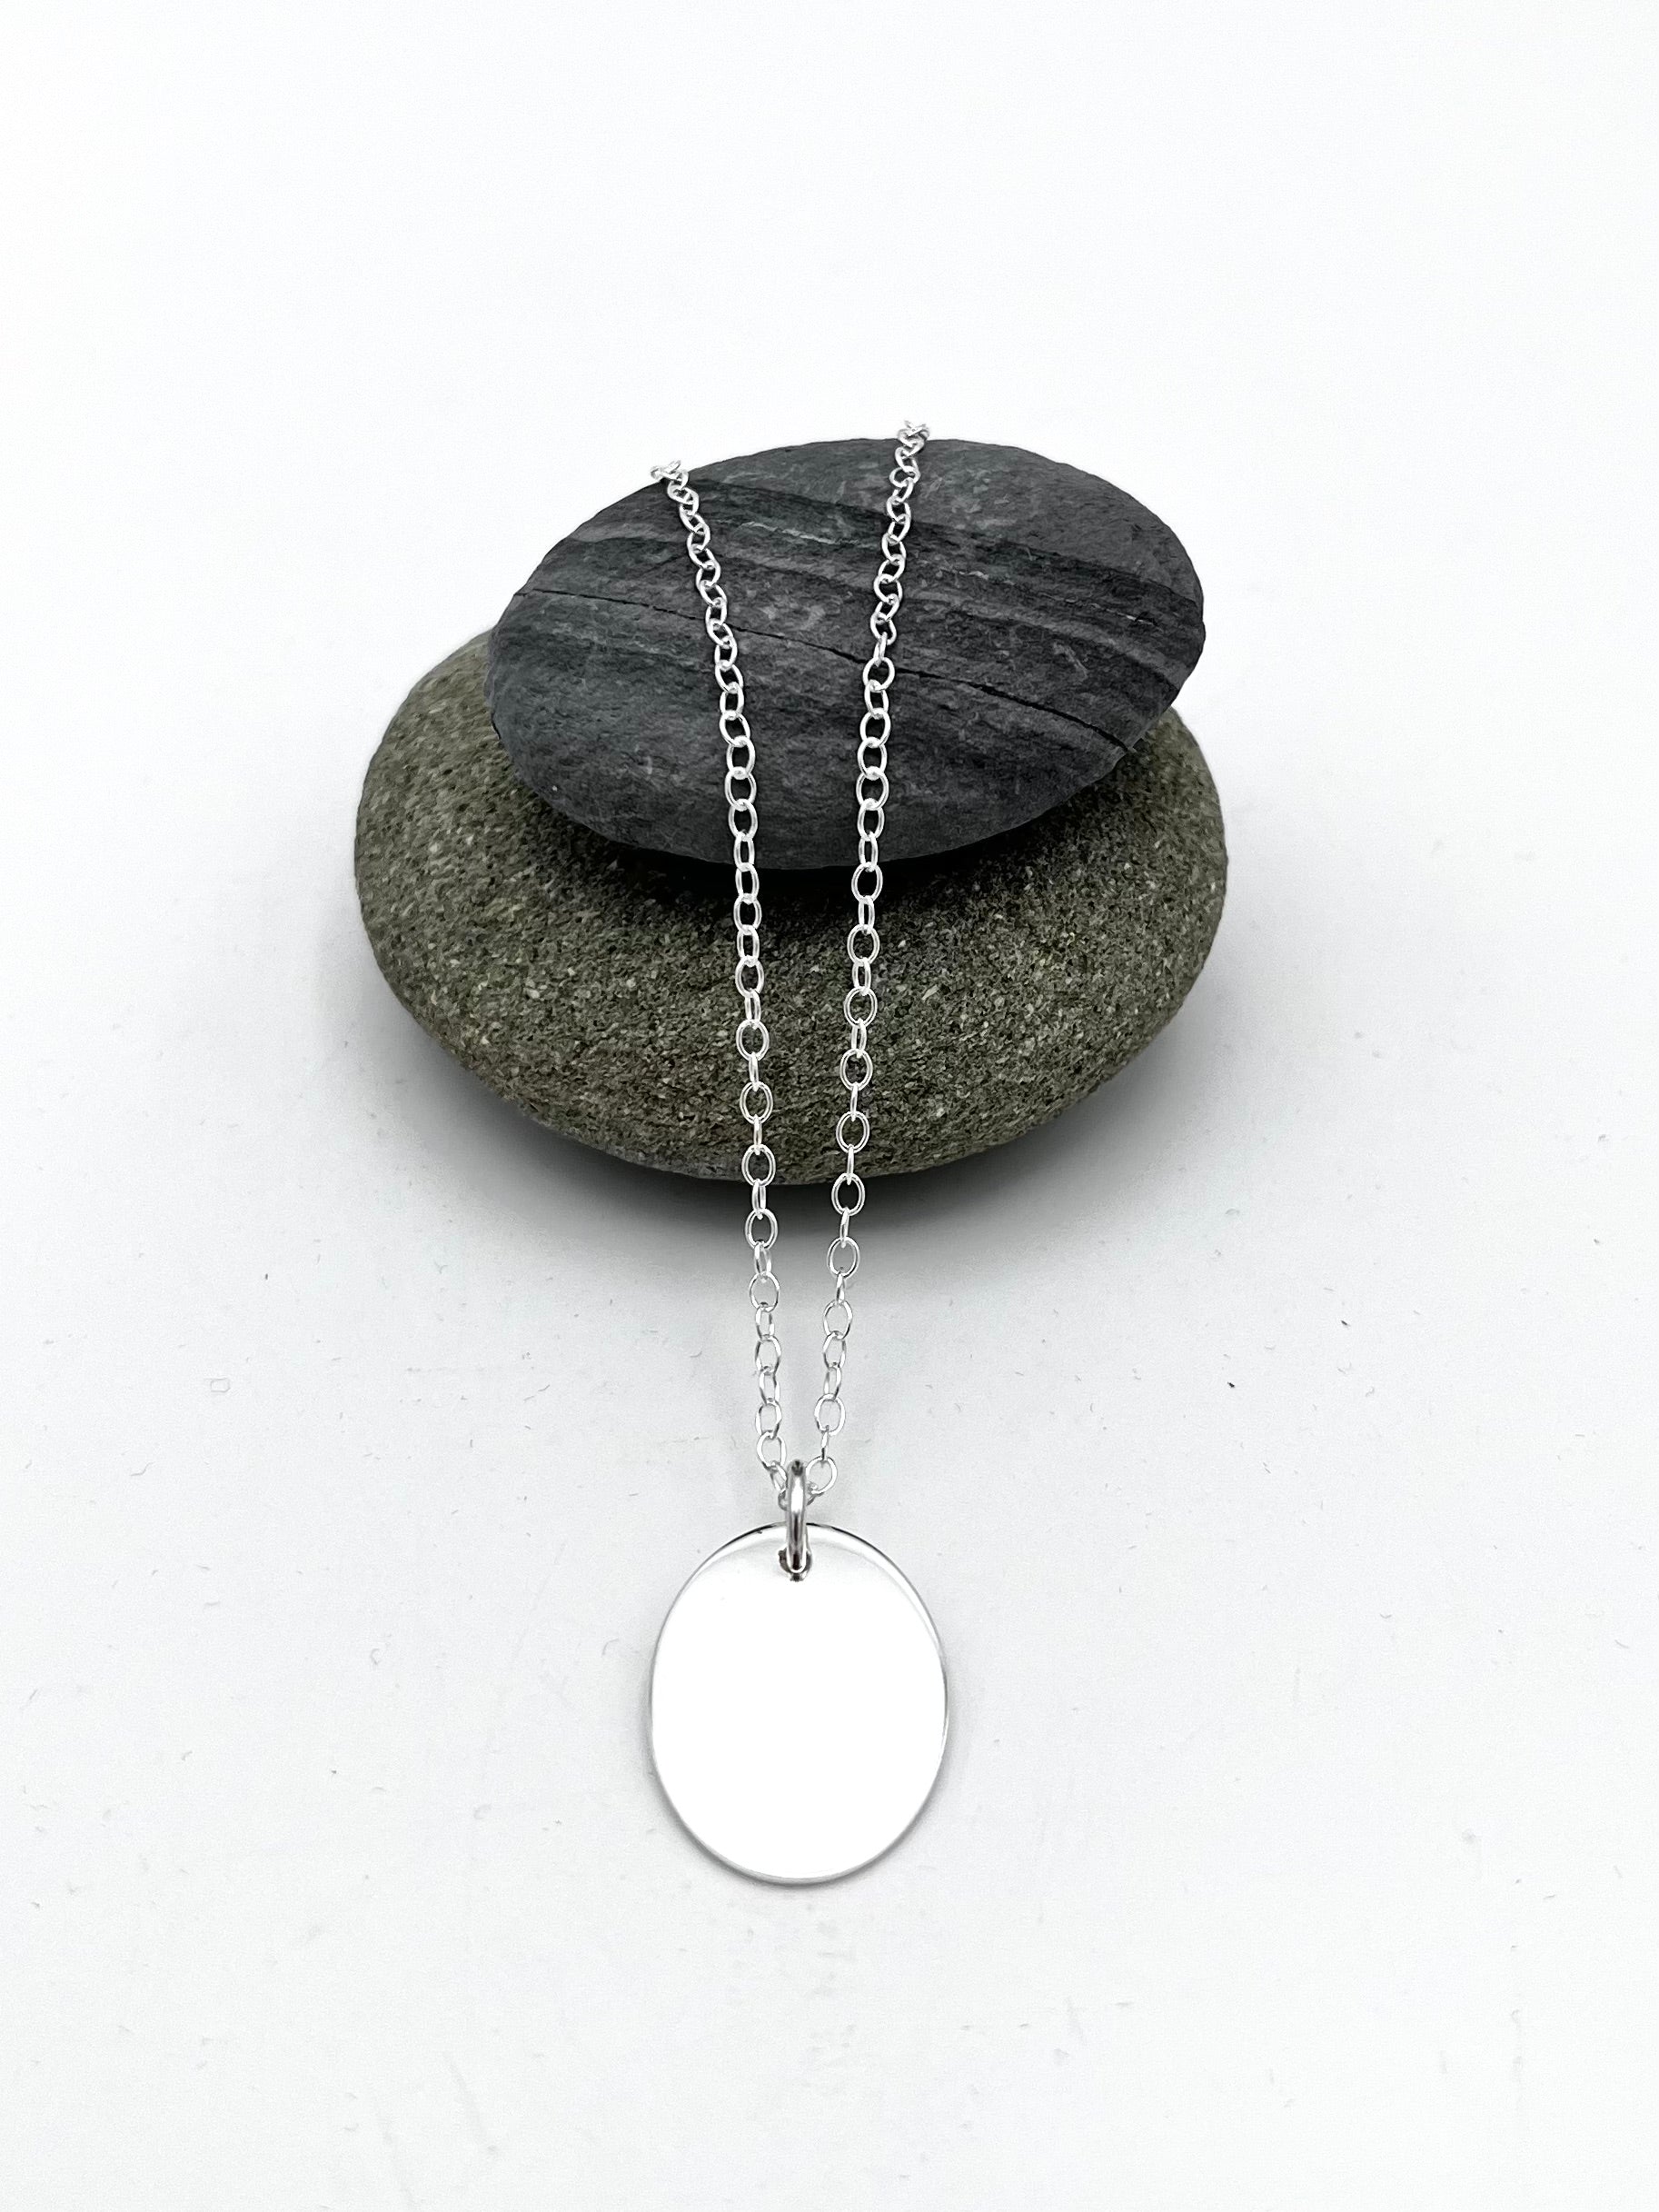 Oval disc pendant 20mm long polished finish on 16" chain